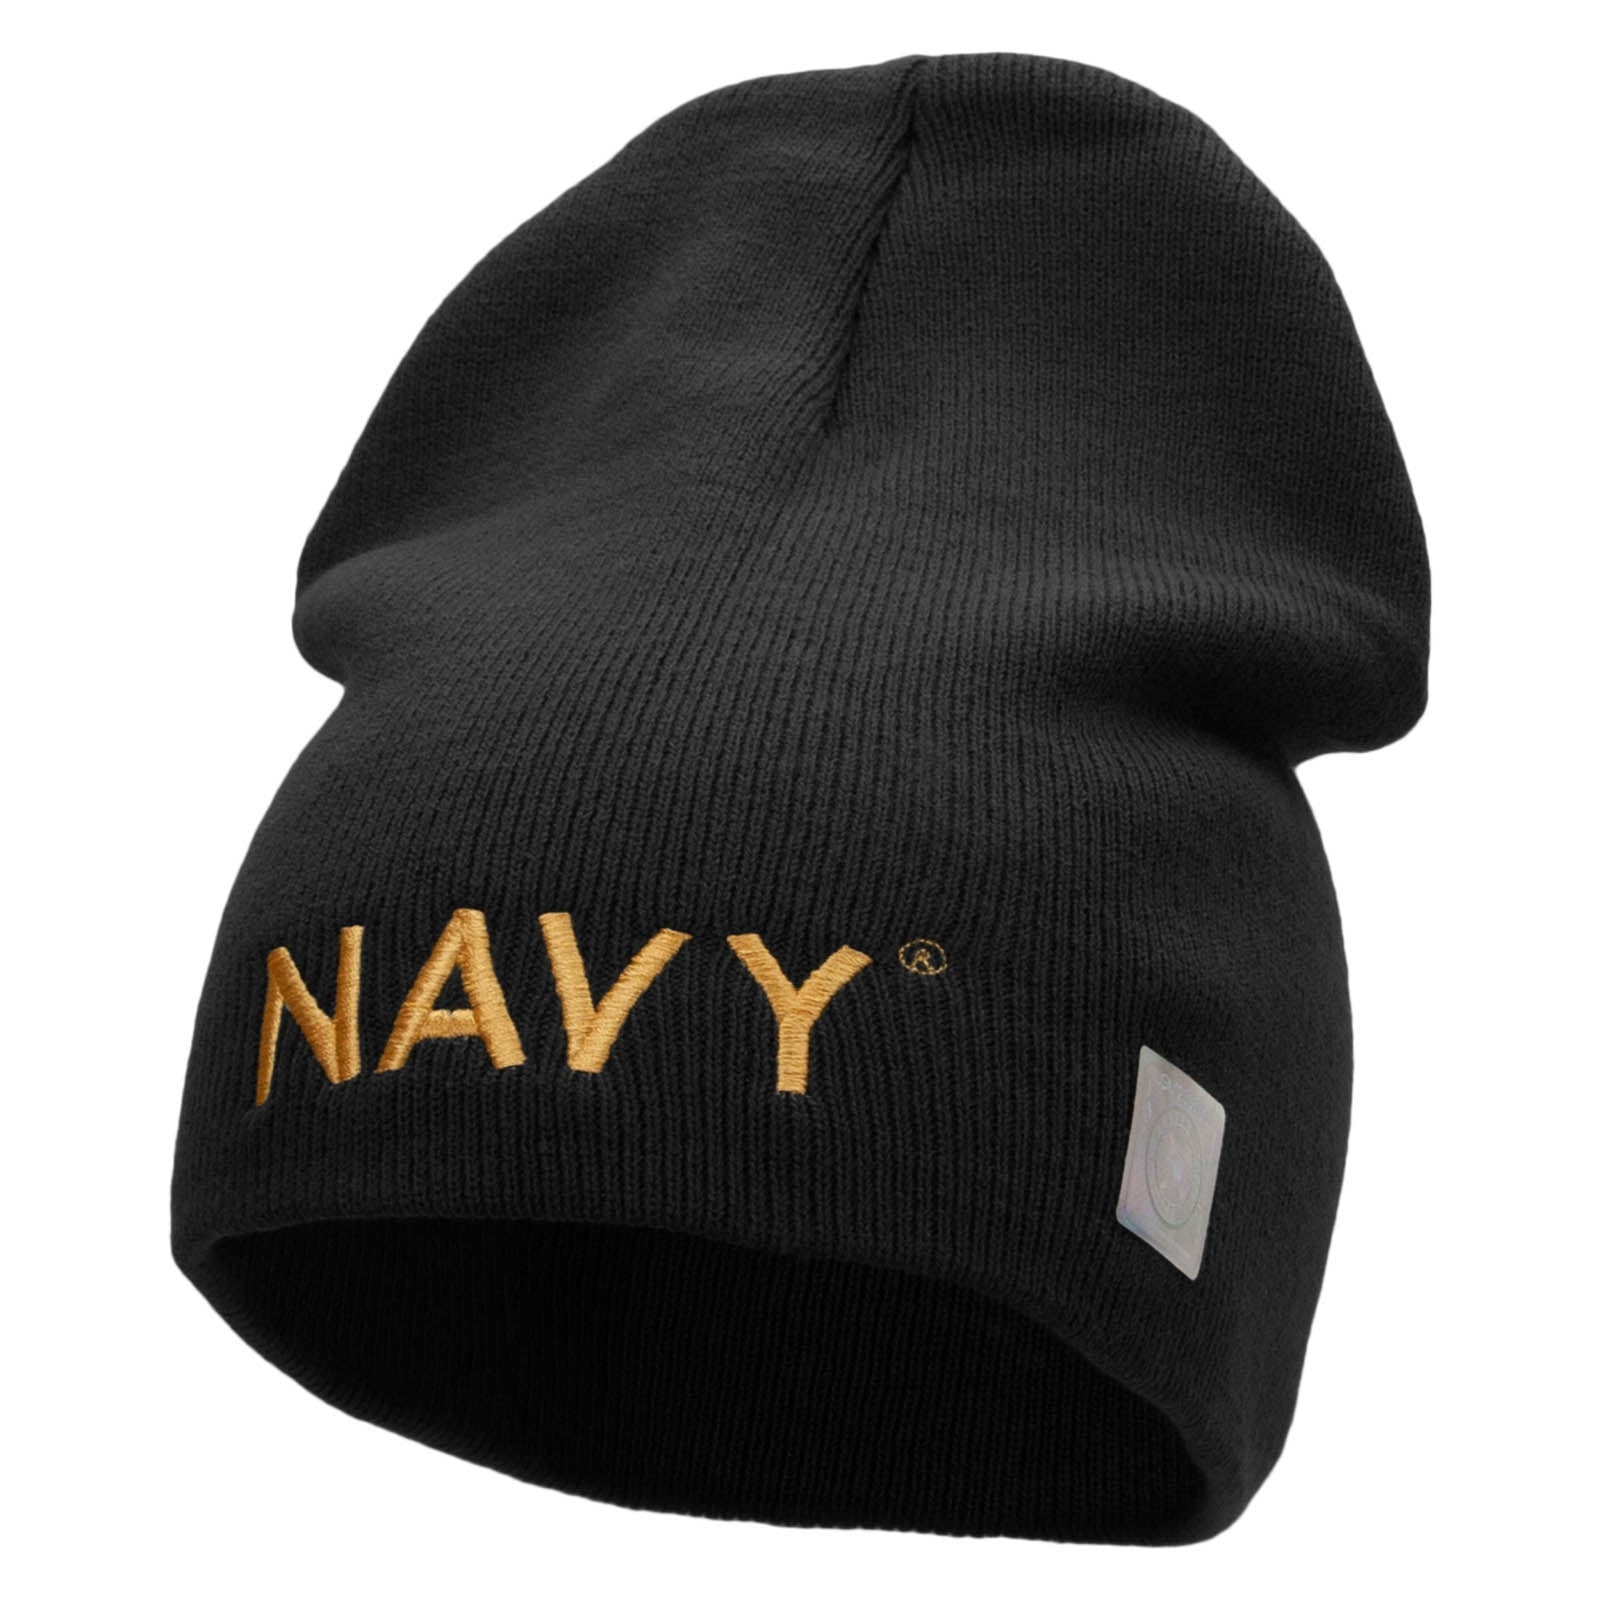 Licensed Navy Embroidered Short Beanie Made in USA - Black OSFM